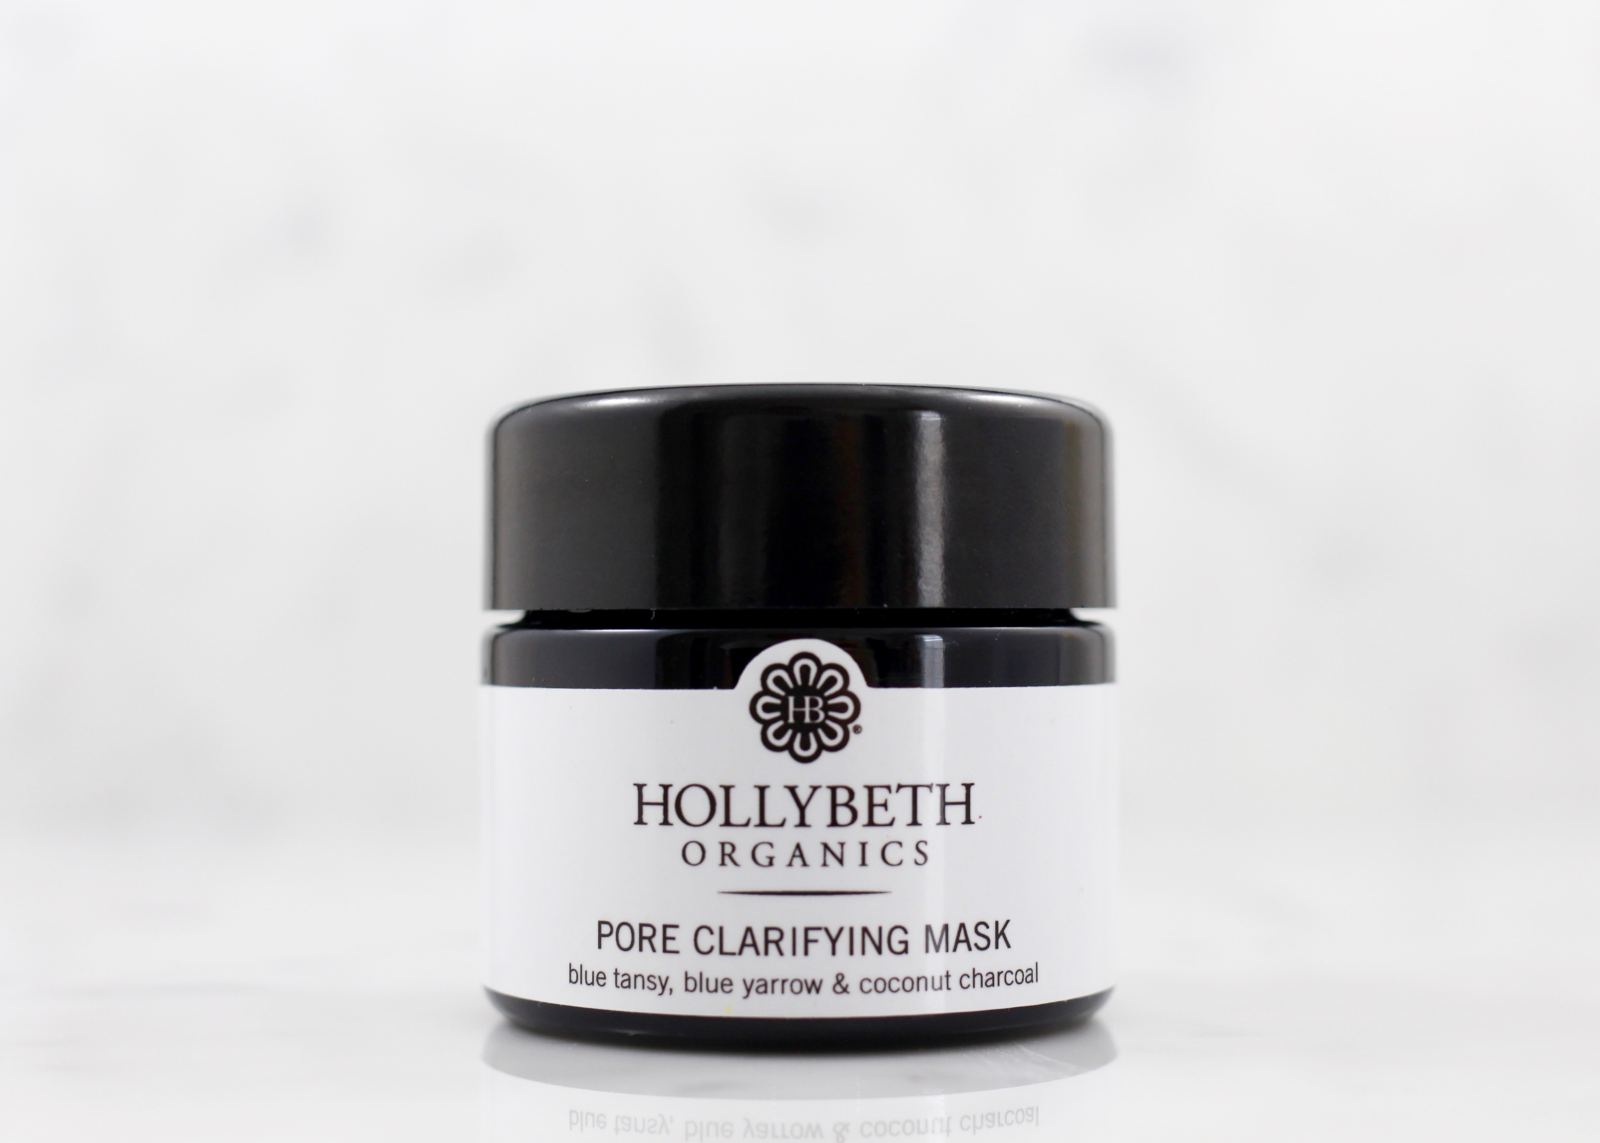 Product Review: HollyBeth Organics Pore Clarifying Mask